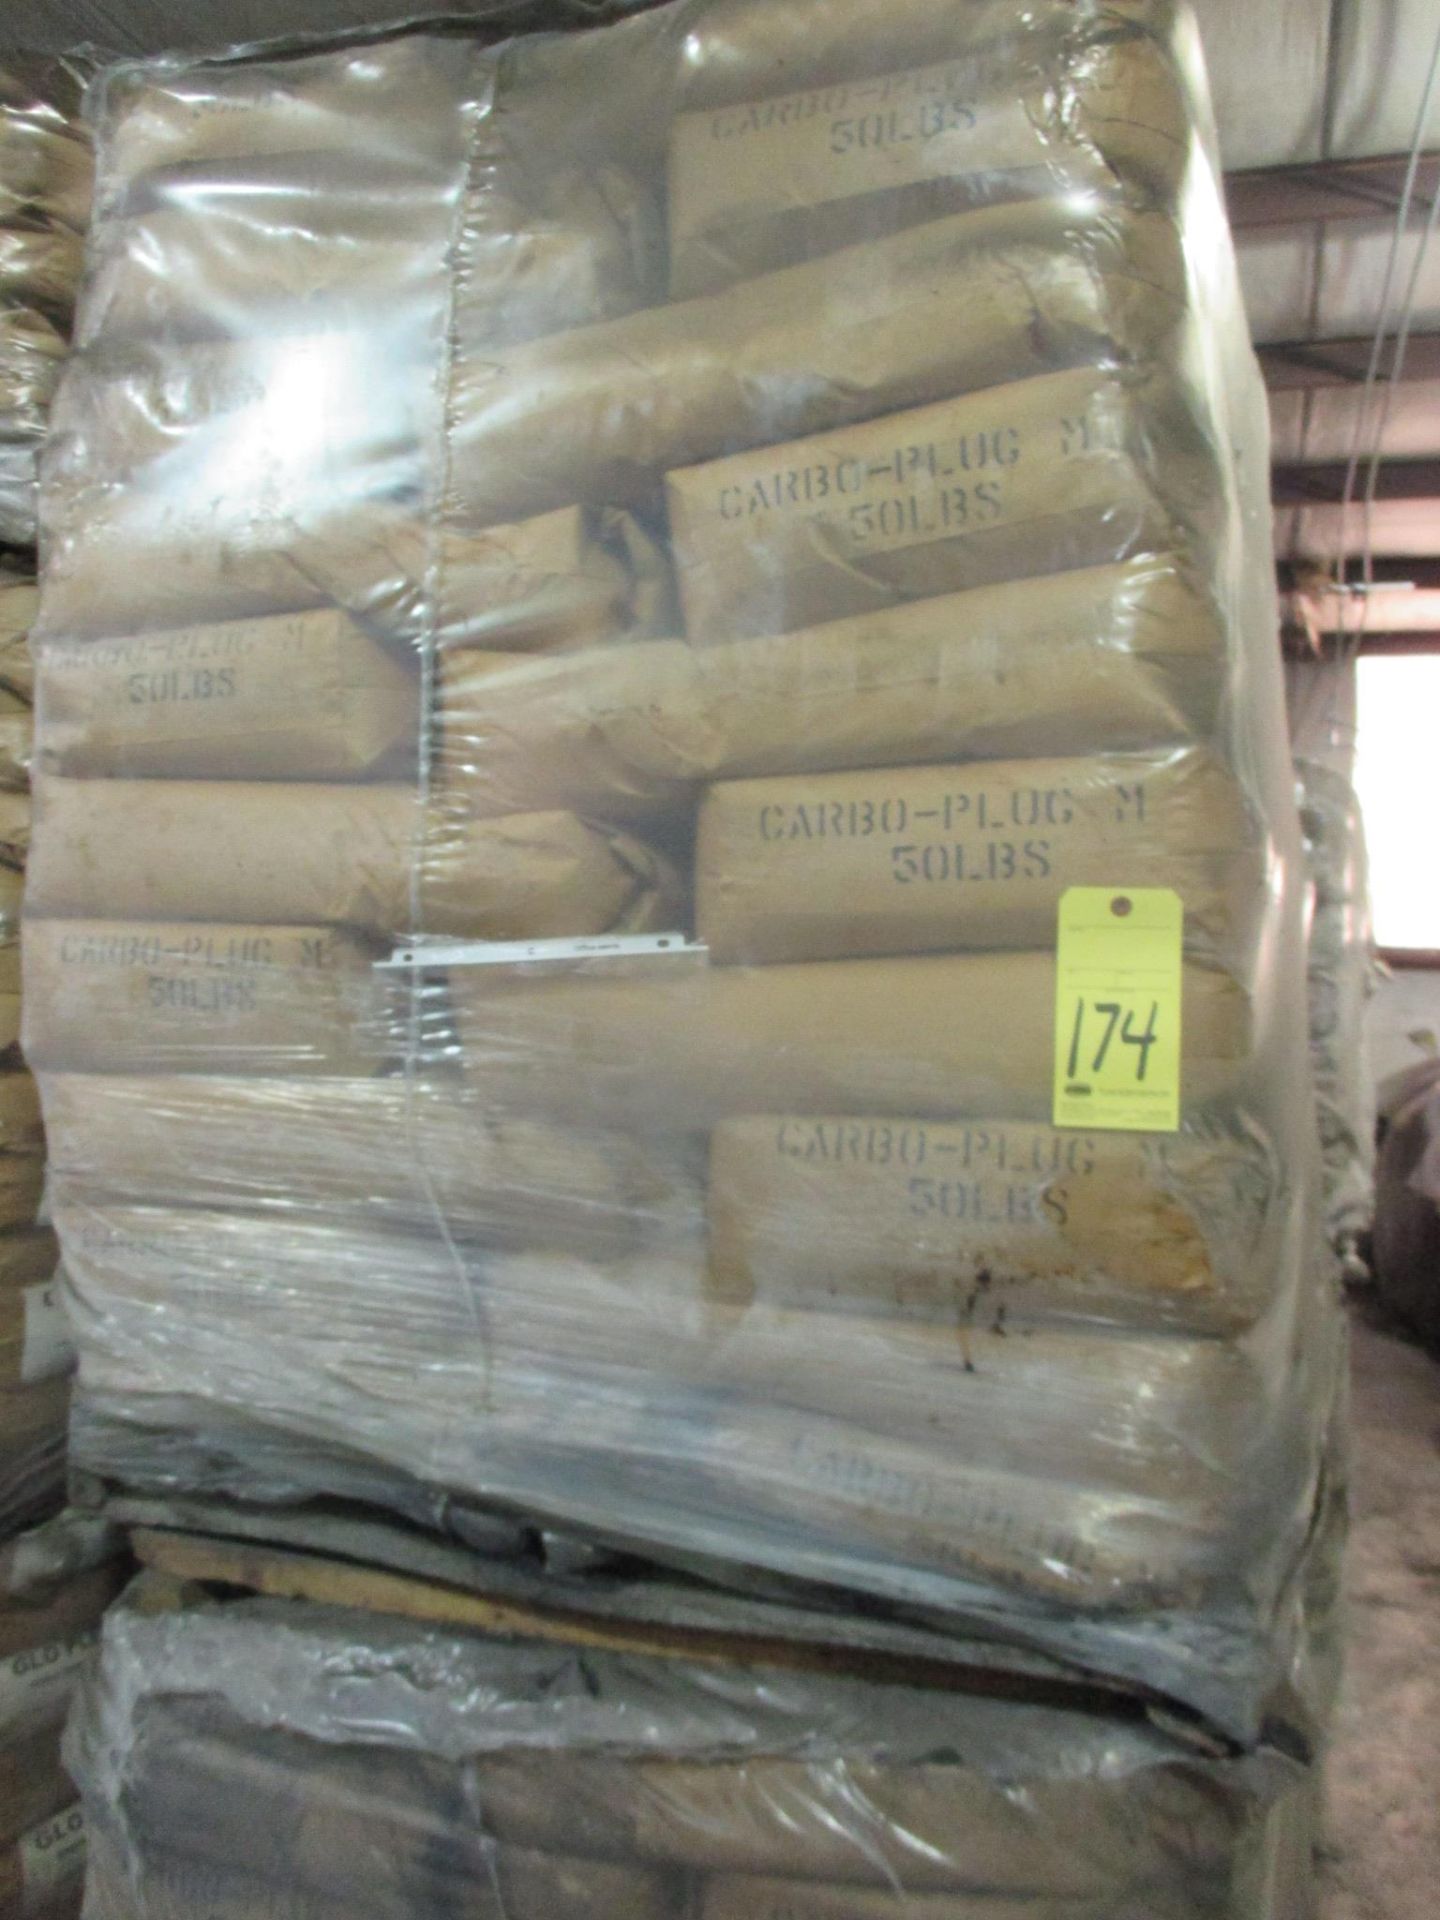 LOT OF CARBO-PLUG M (approx. (200) 50 lb. bags)